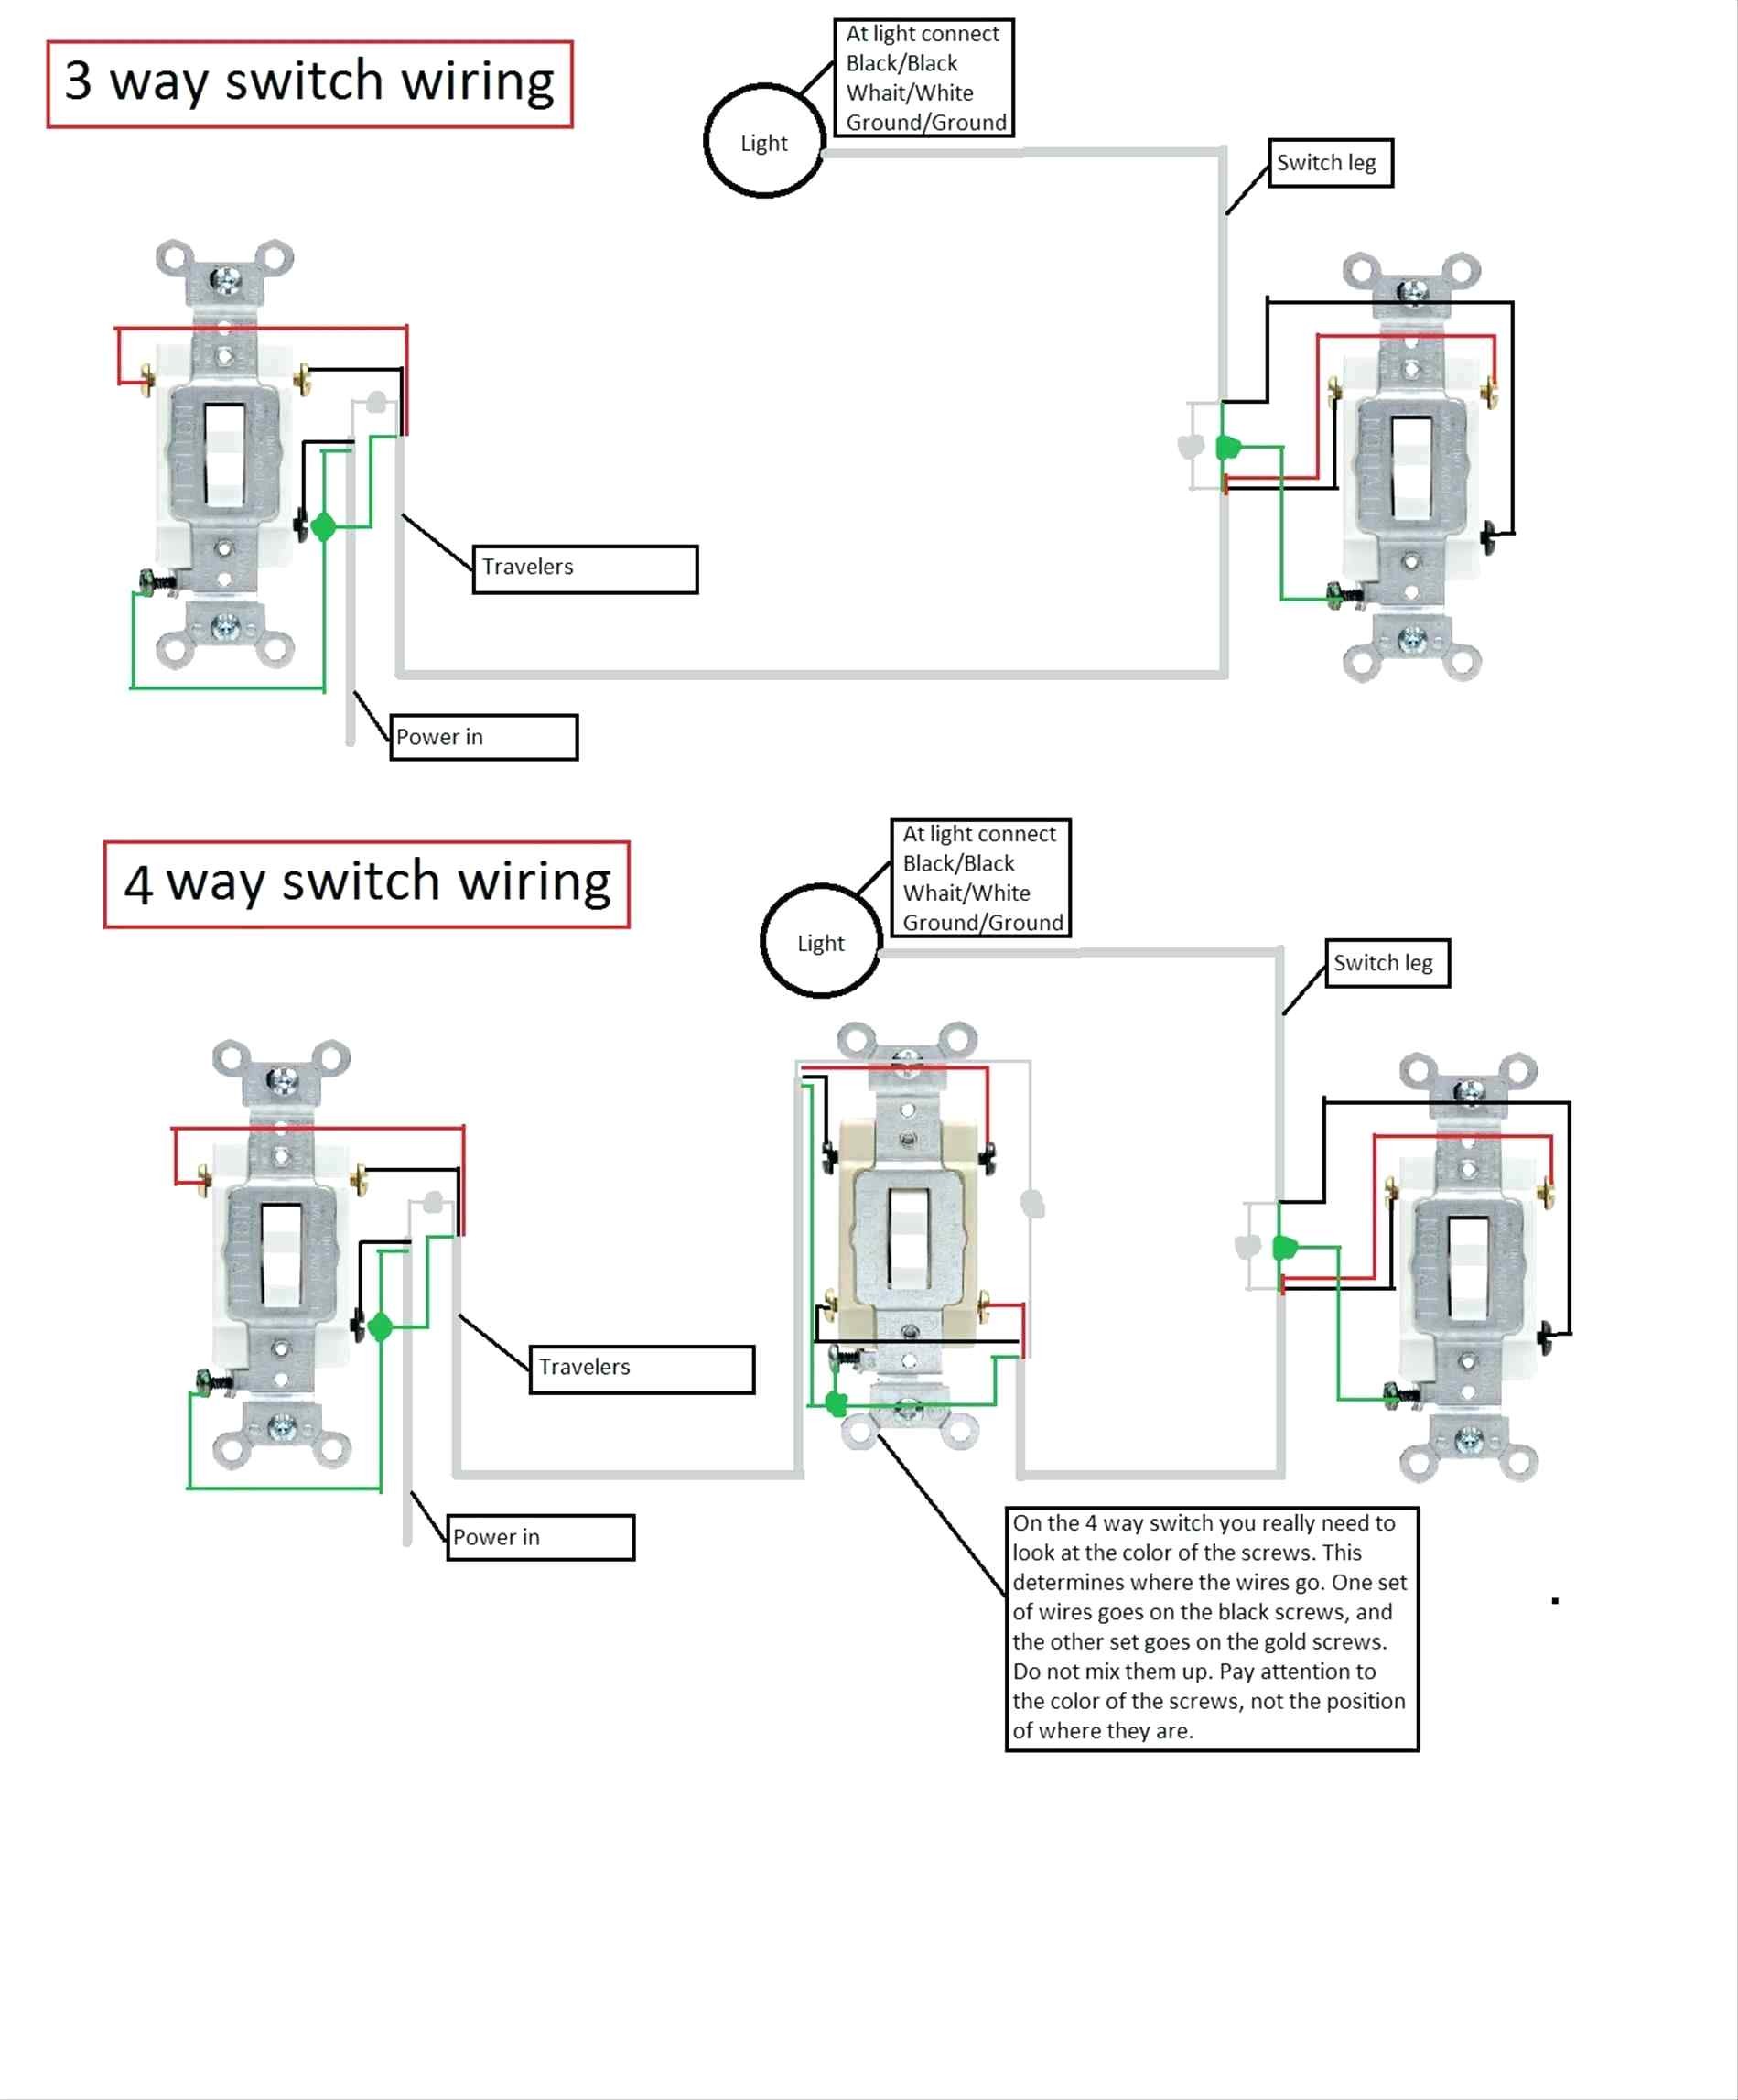 Hall Light Switch Wiring Diagram Inspiration Diagram Two Way Light Switch Diagram Landing Wiring Two Way